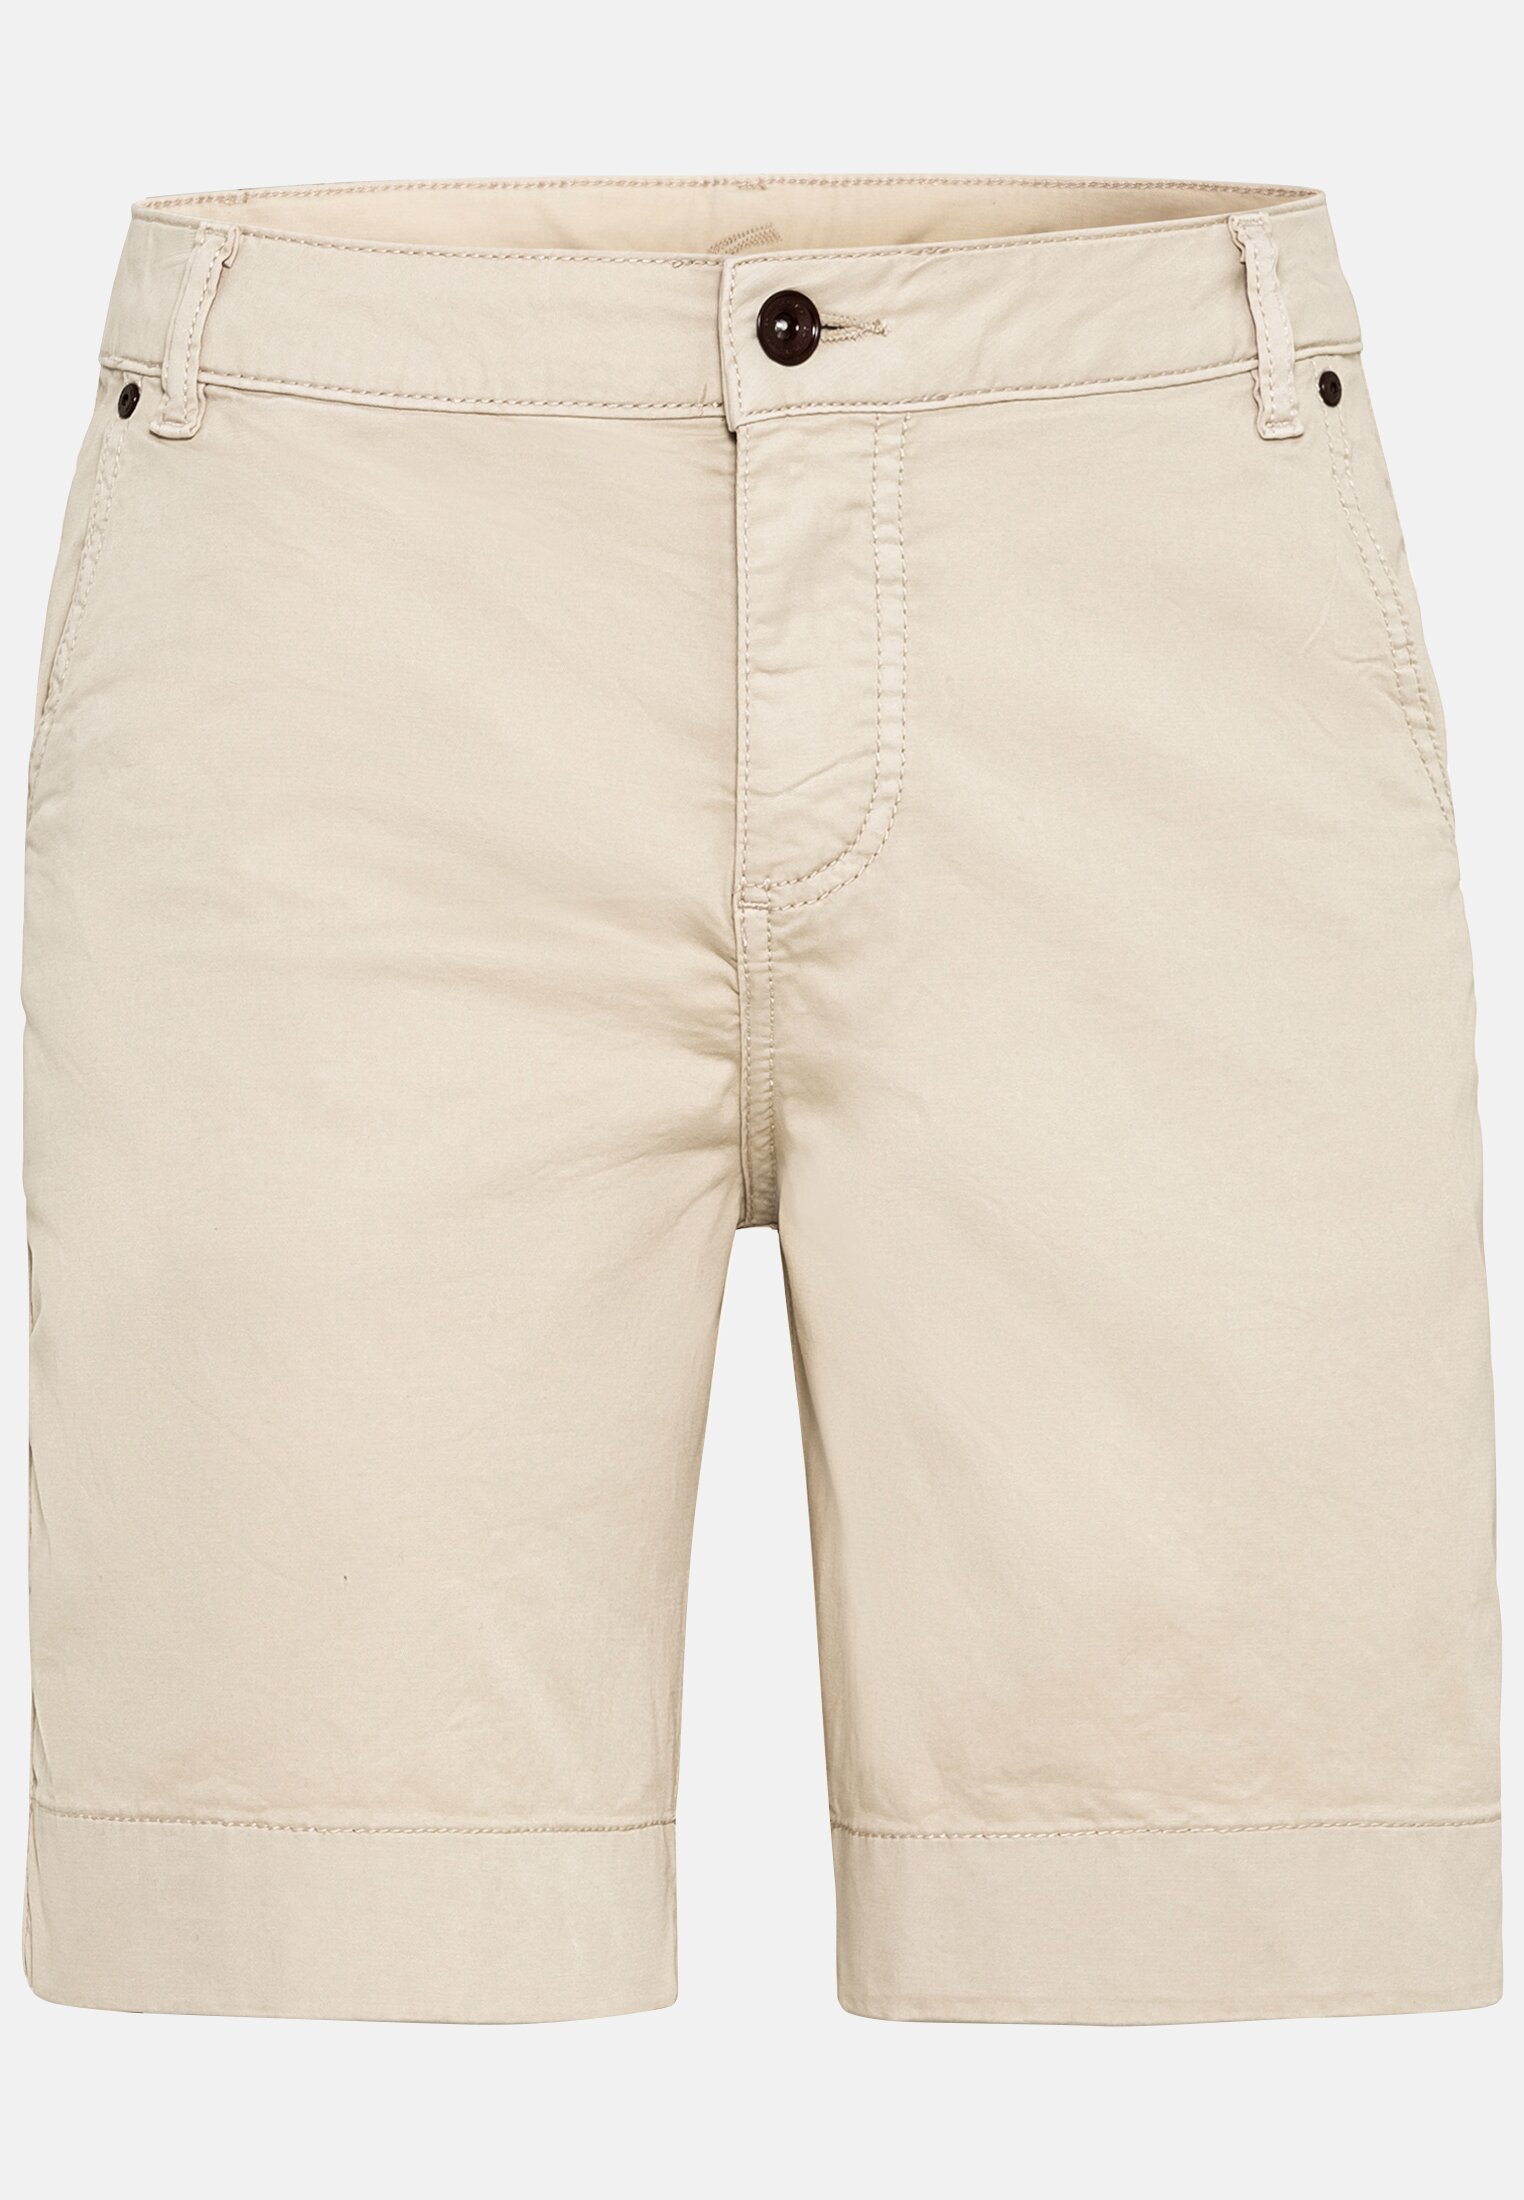 Camel Active Shorts made of cotton mix